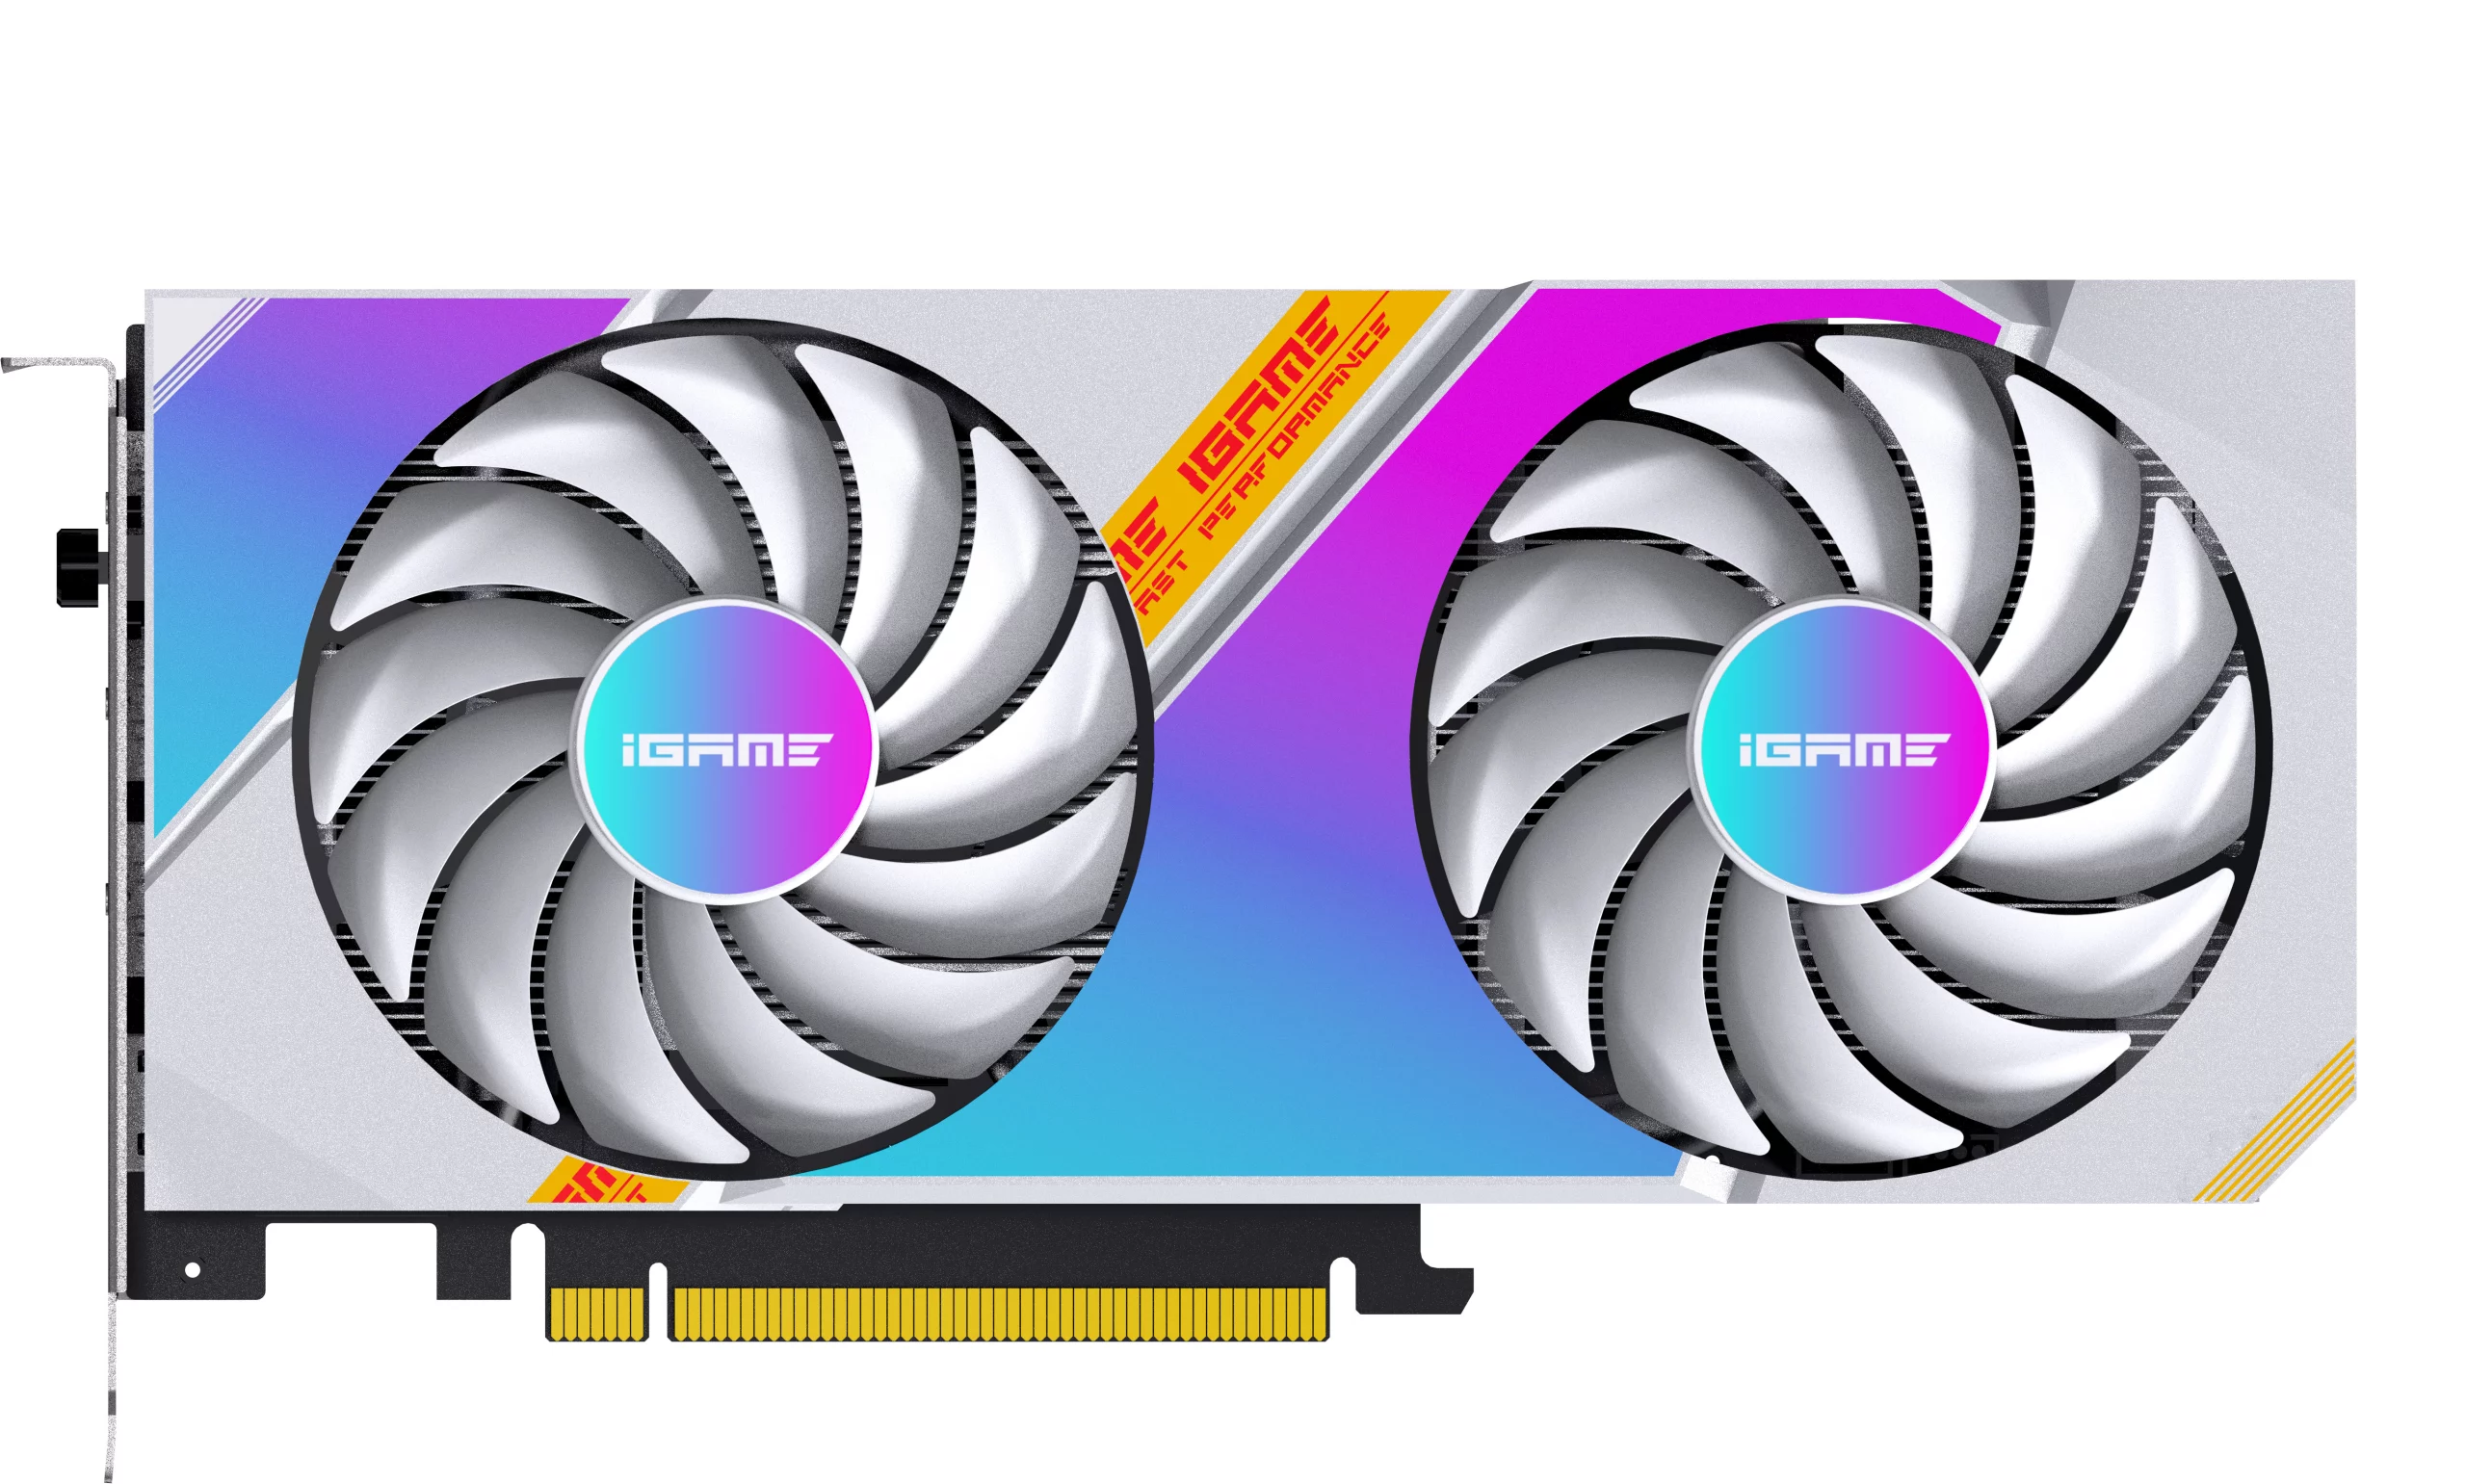 Colorful ultra duo 4060. RTX 3050 Ultra w. Colorful IGAME GEFORCE RTX 3050 Ultra w OC 8g-v. RTX 3050 colorful. Colorful IGAME RTX 3050 Ultra w Duo OC 8g-v.